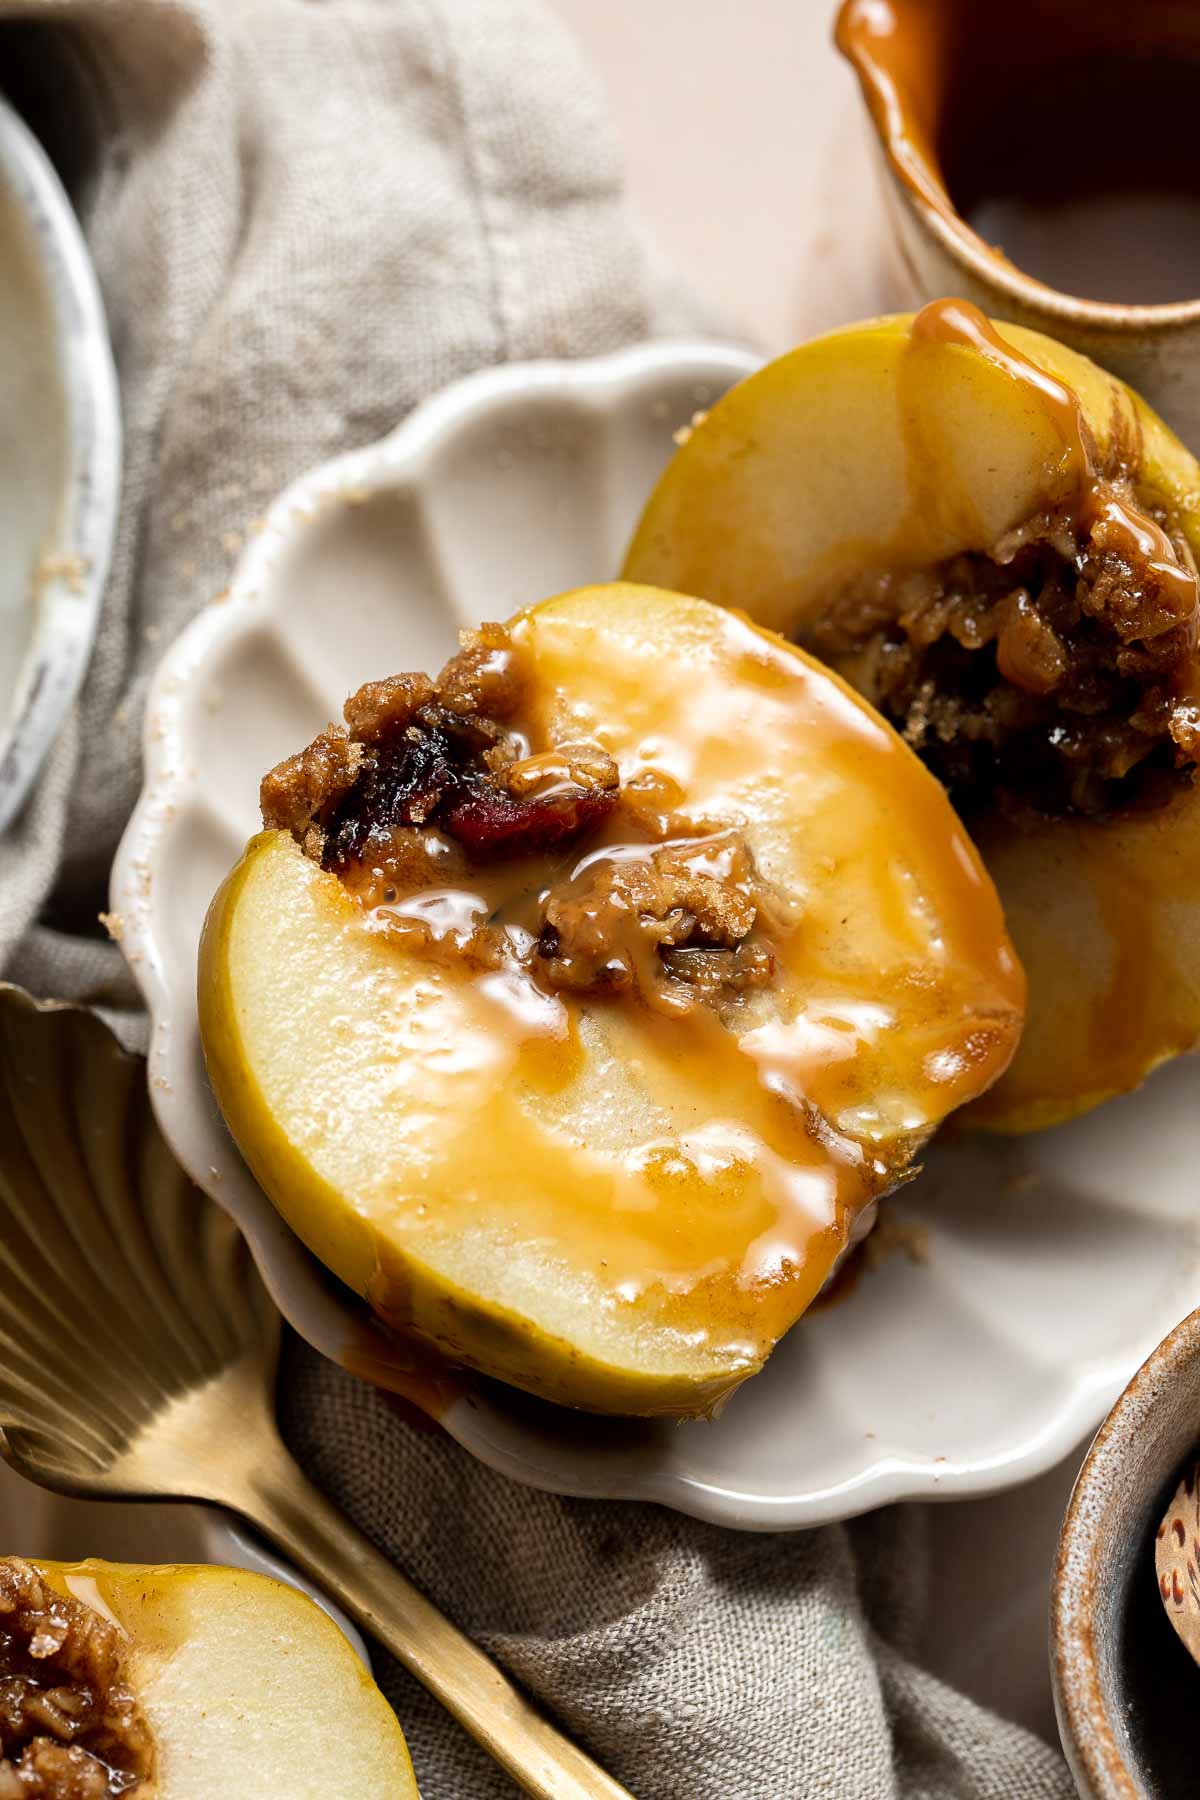 Baked Apples are soft, warm, and tender, with a crunchy sweet cinnamon oat filling. This cozy and comforting fall dessert is quick easy to make too. | aheadofthyme.com